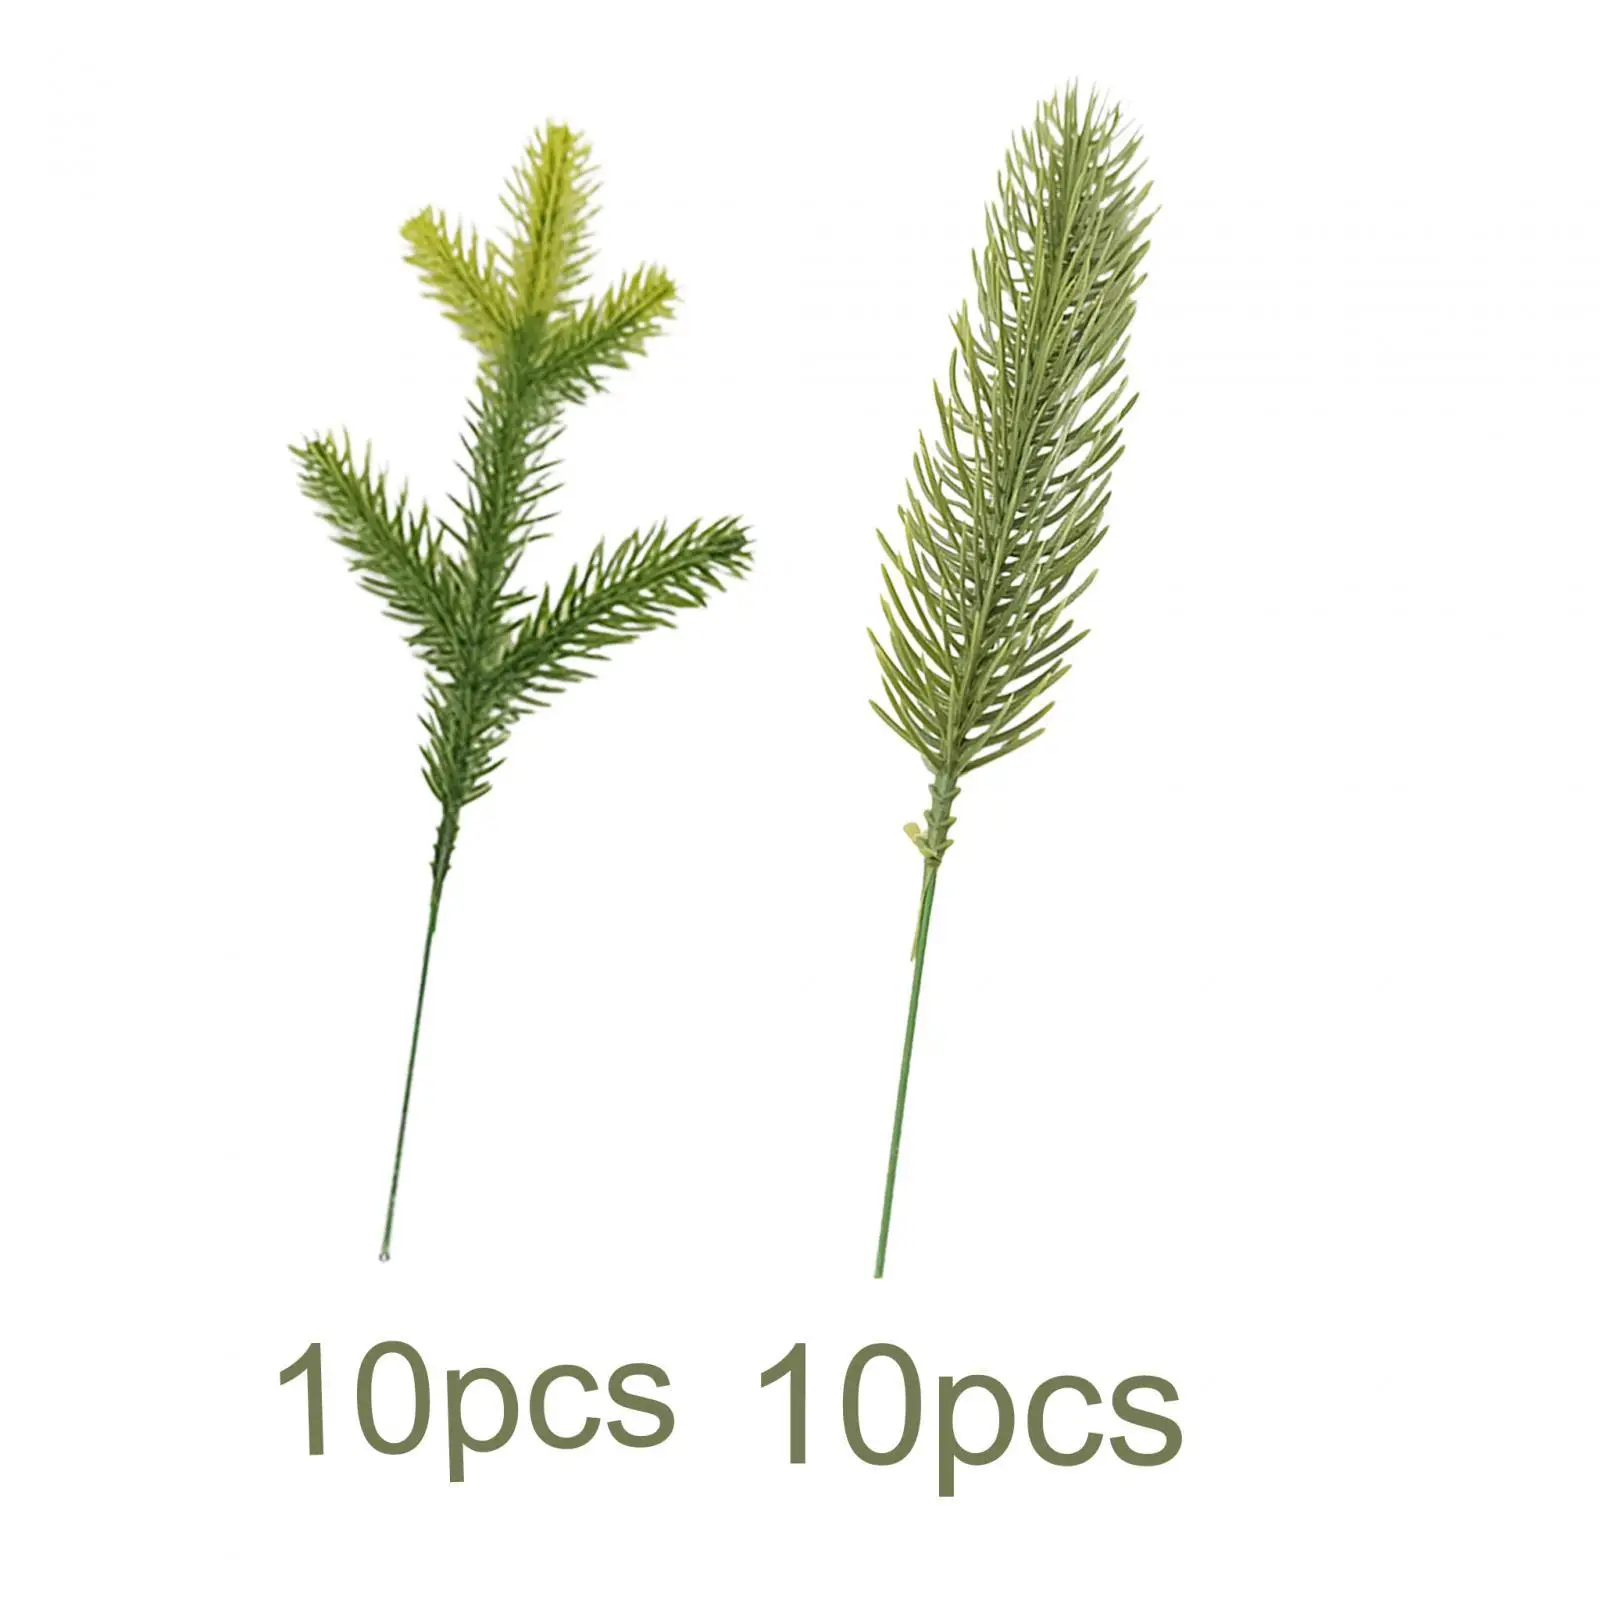 10Pcs Artificial Pine Branches Fake Plant DIY Wreath Accessories Garland Christmas Tree Ornament for Xmas Wedding Decorations